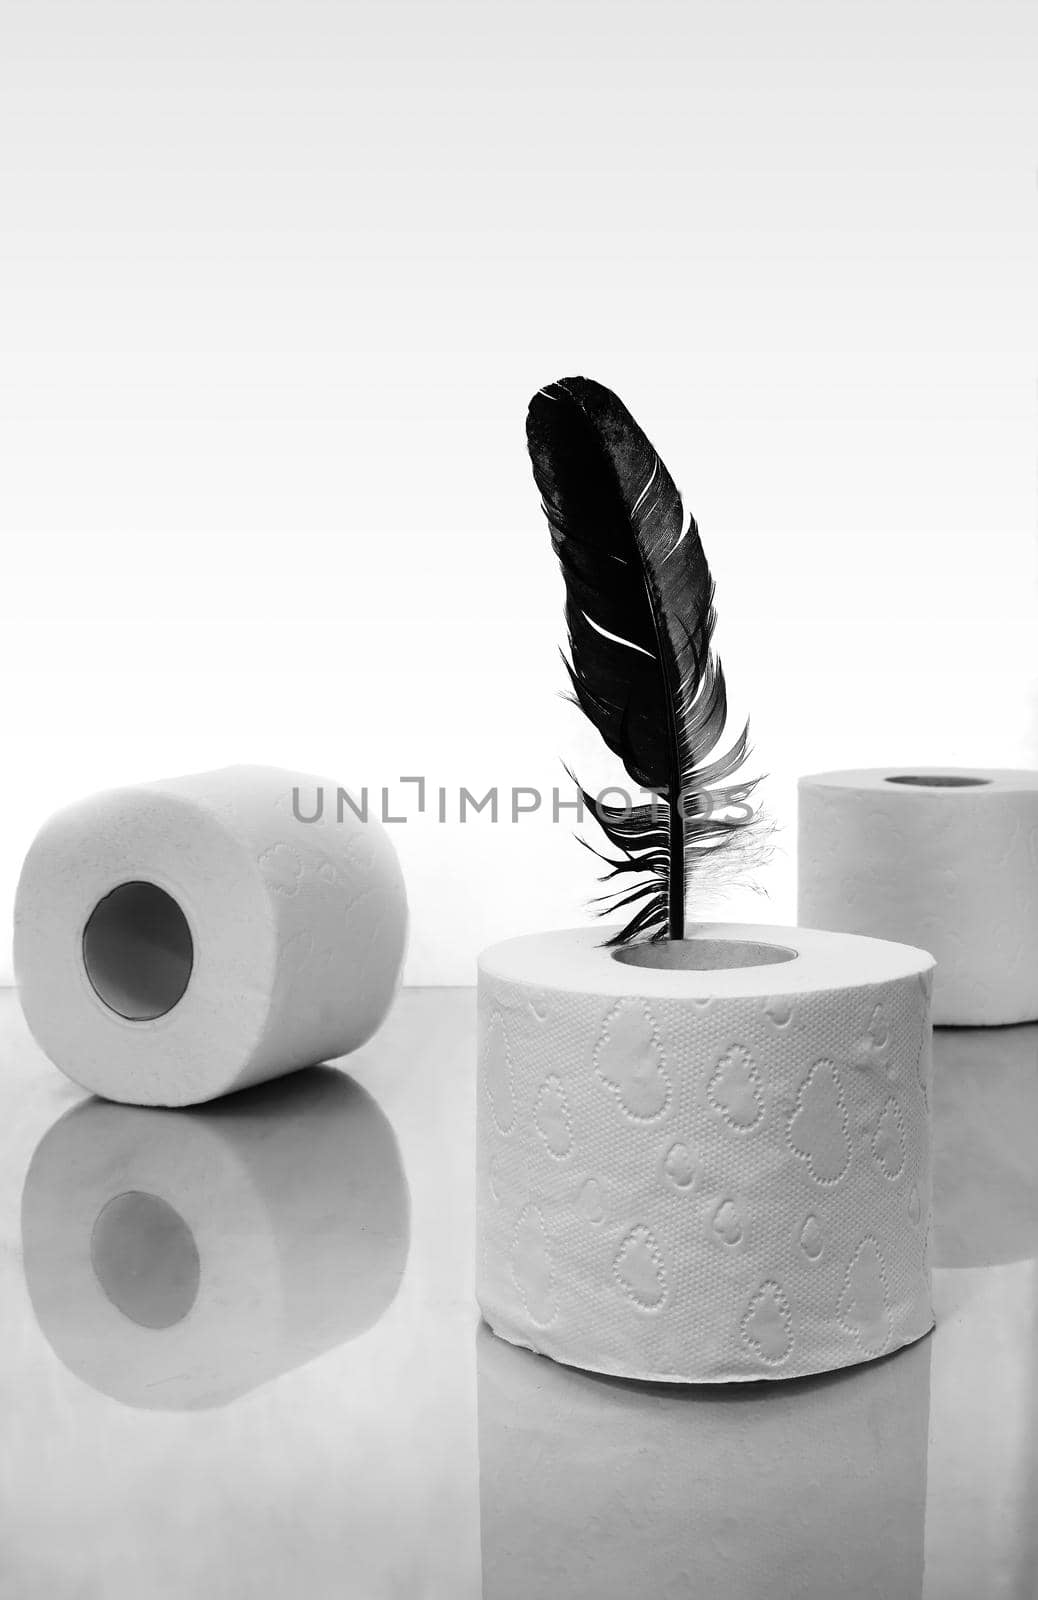 Toilet paper and a bird feather, a symbol of soft touch. by georgina198